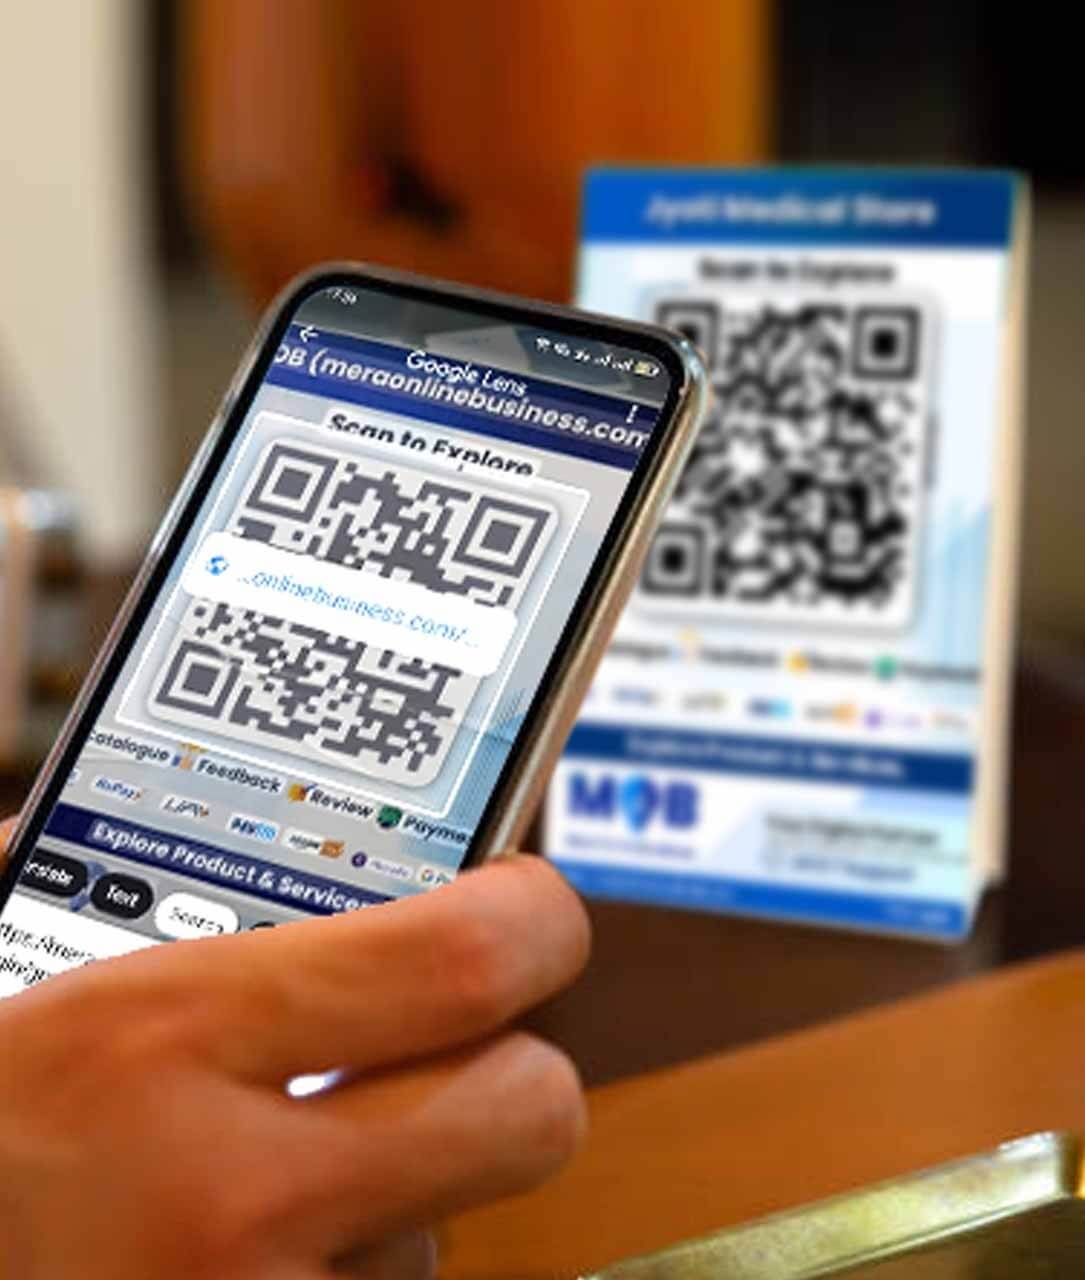 3rd step to generate business qr